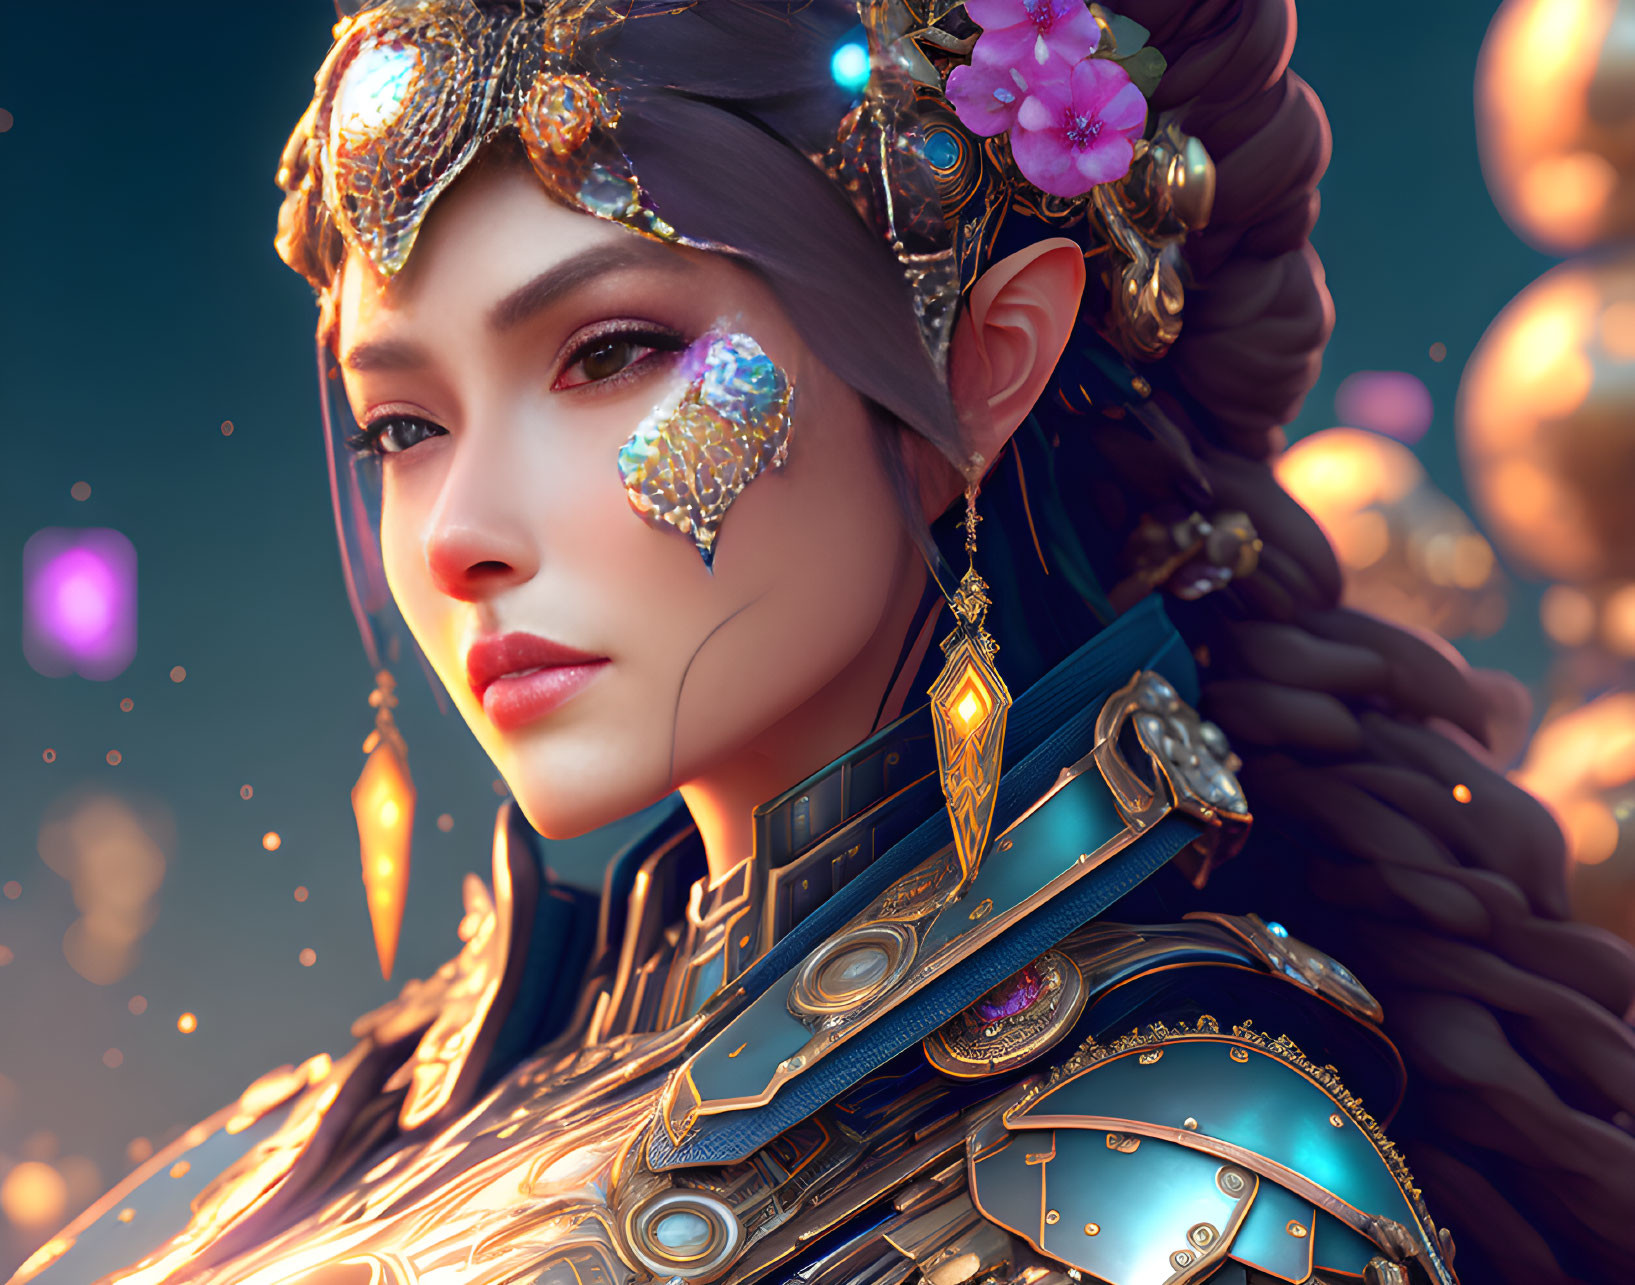 Intricate digital portrait of a woman in ornate armor and headdress